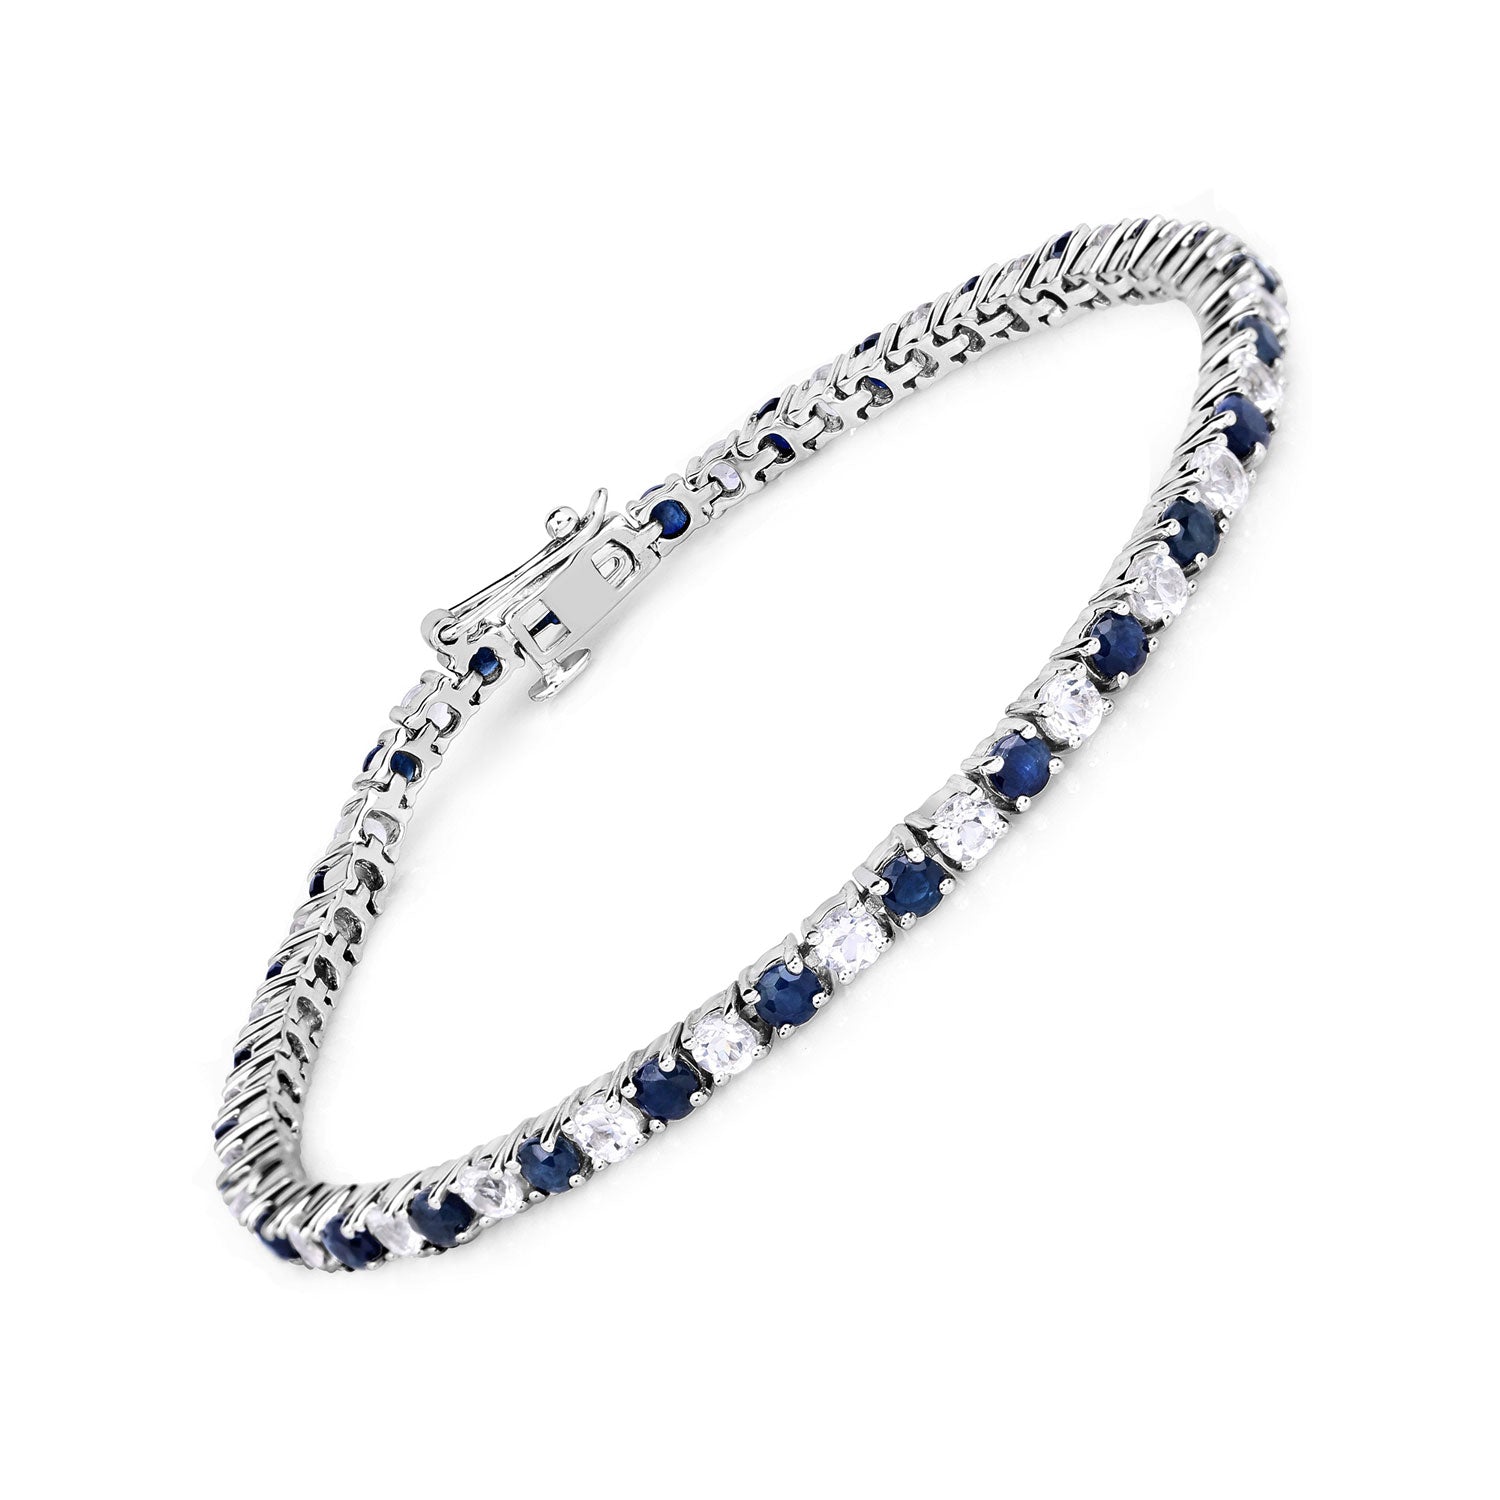 Blue Sapphire and White Topaz Bracelet in Sterling Silver